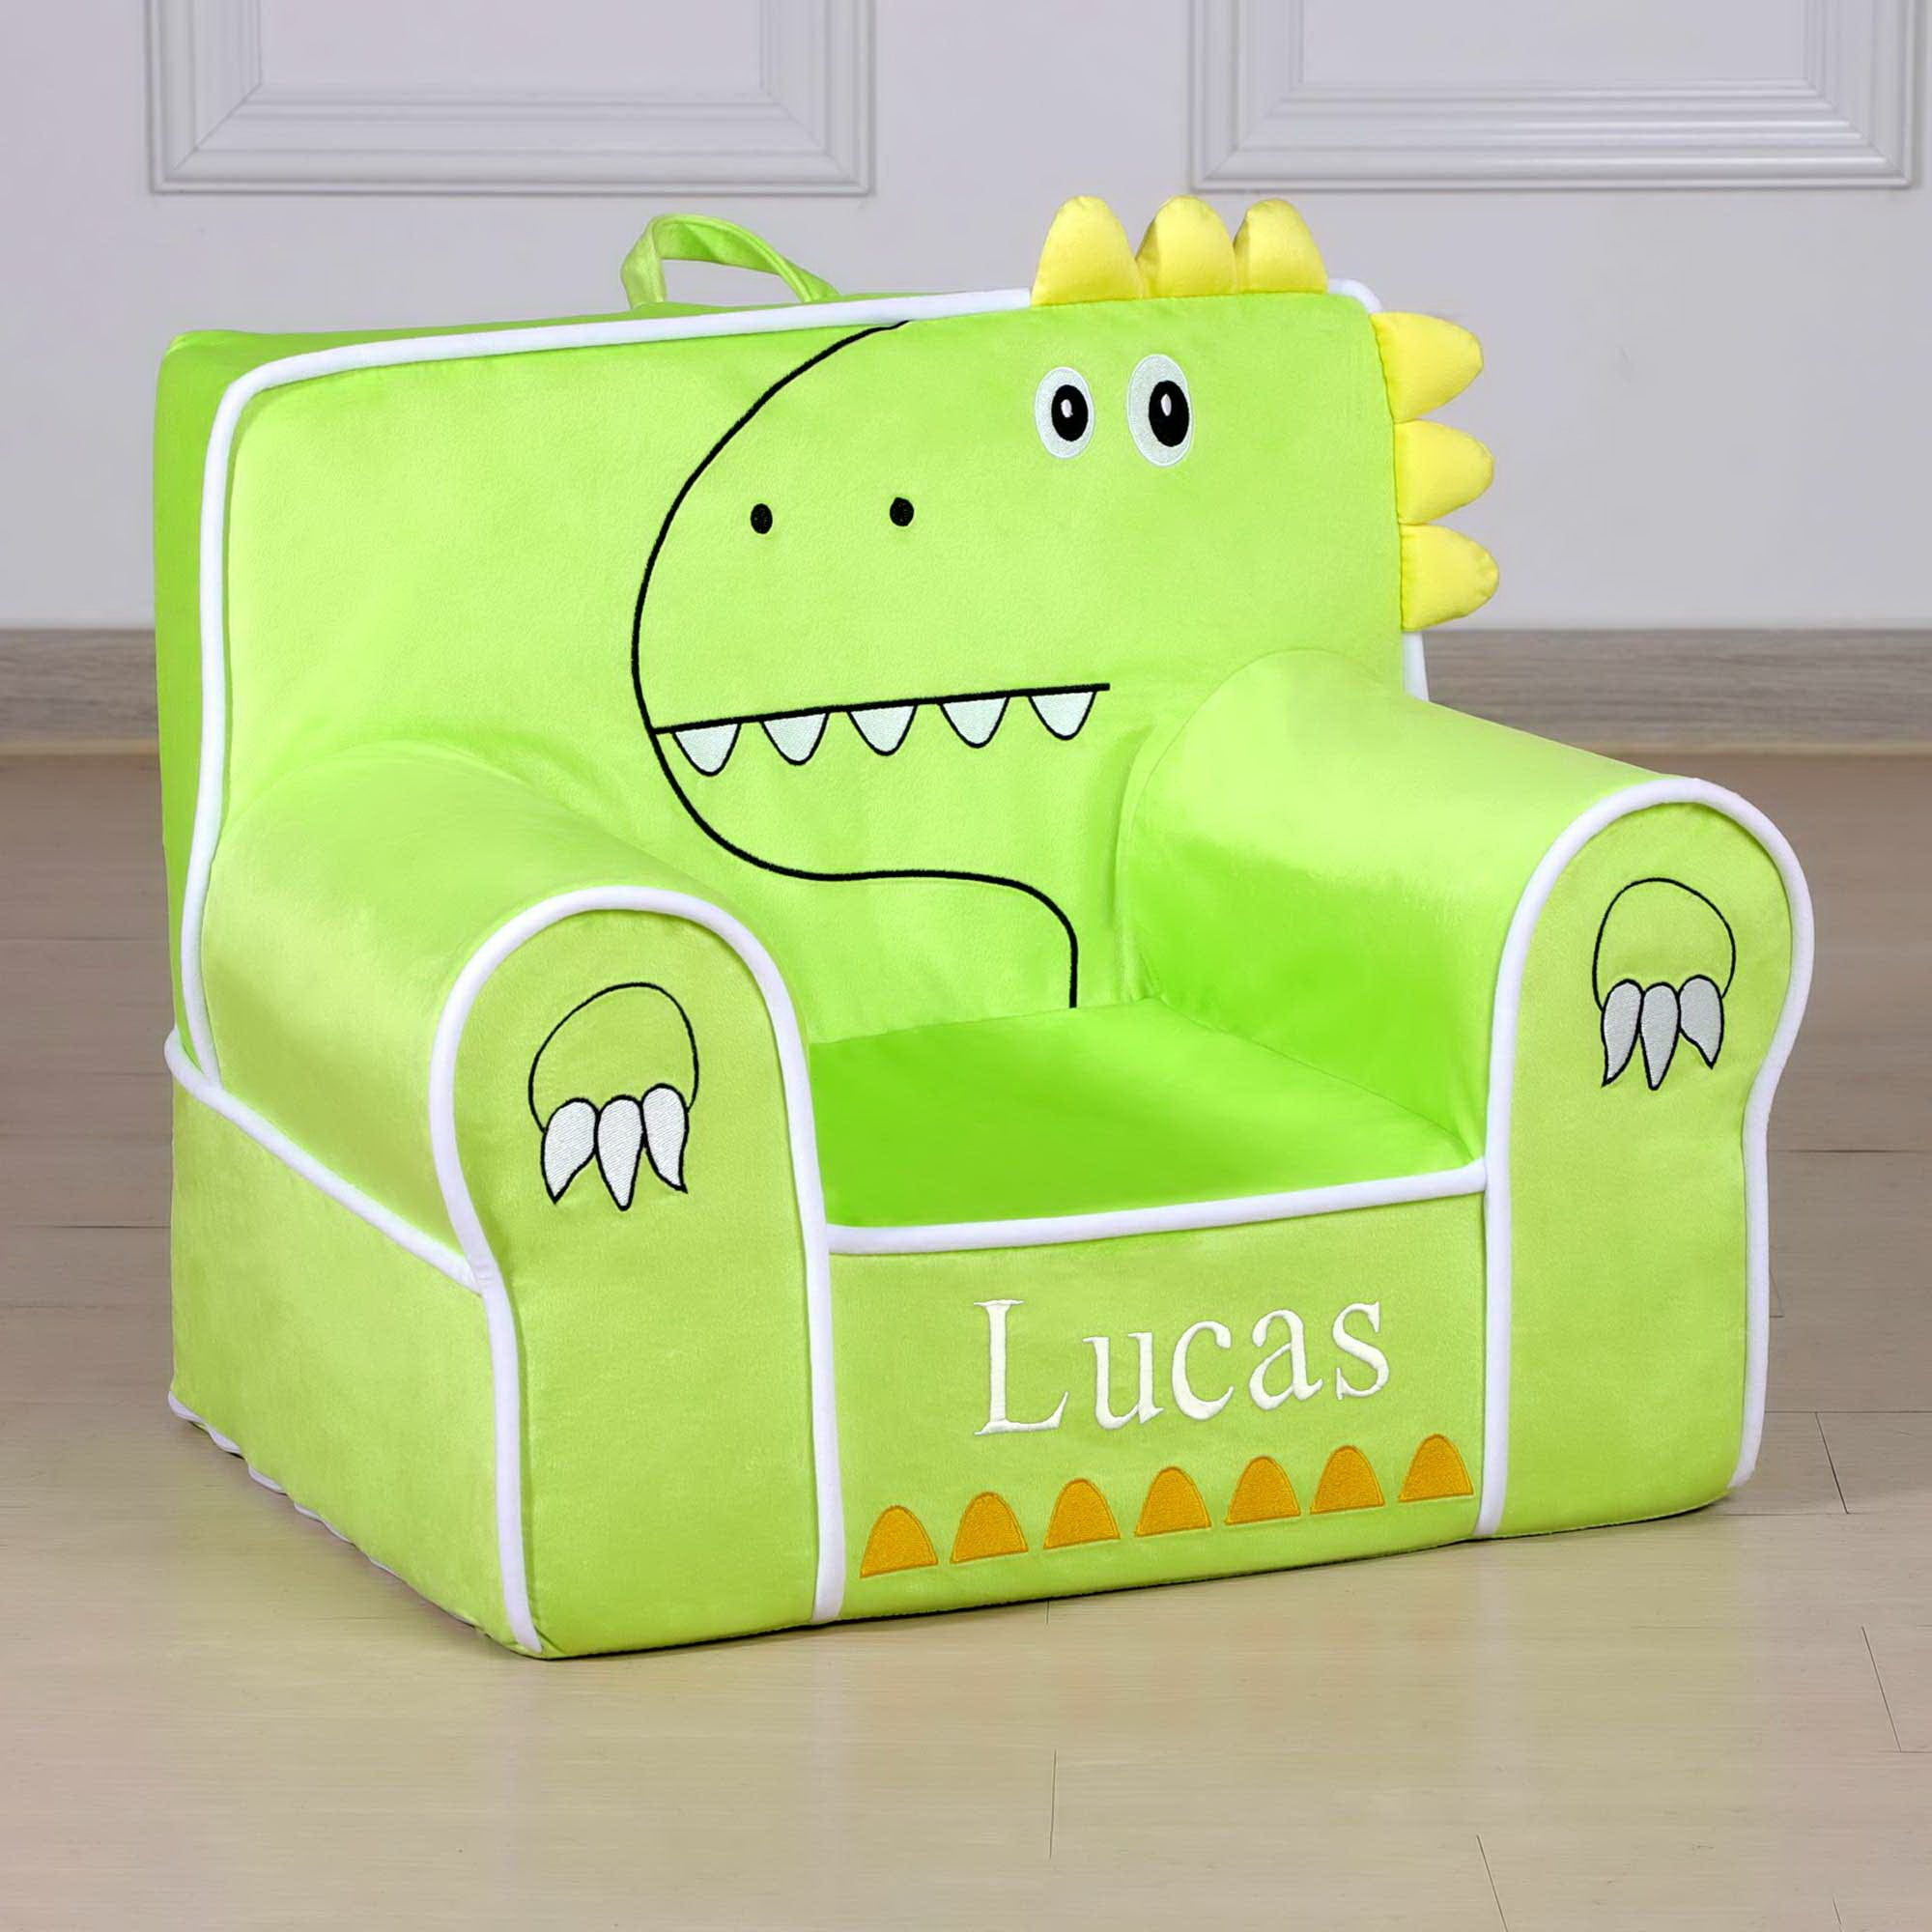 Personalized Creative Wonders Toddler Chair - Ages 1.5 to 4 Years Old (Dinosaur)